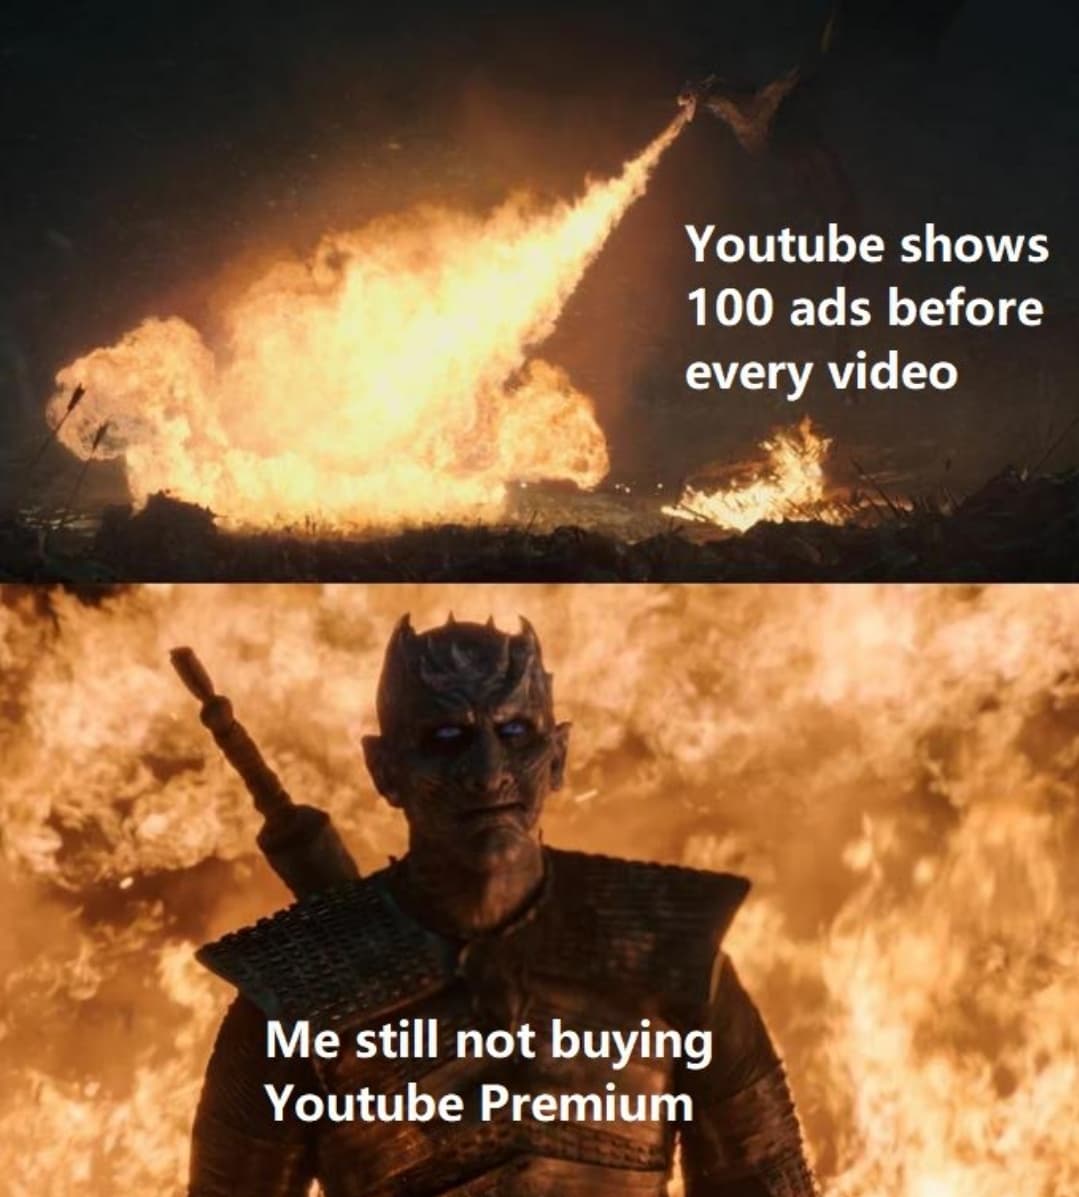 infj entp meme - Youtube shows 100 ads before every video Me still not buying Youtube Premium